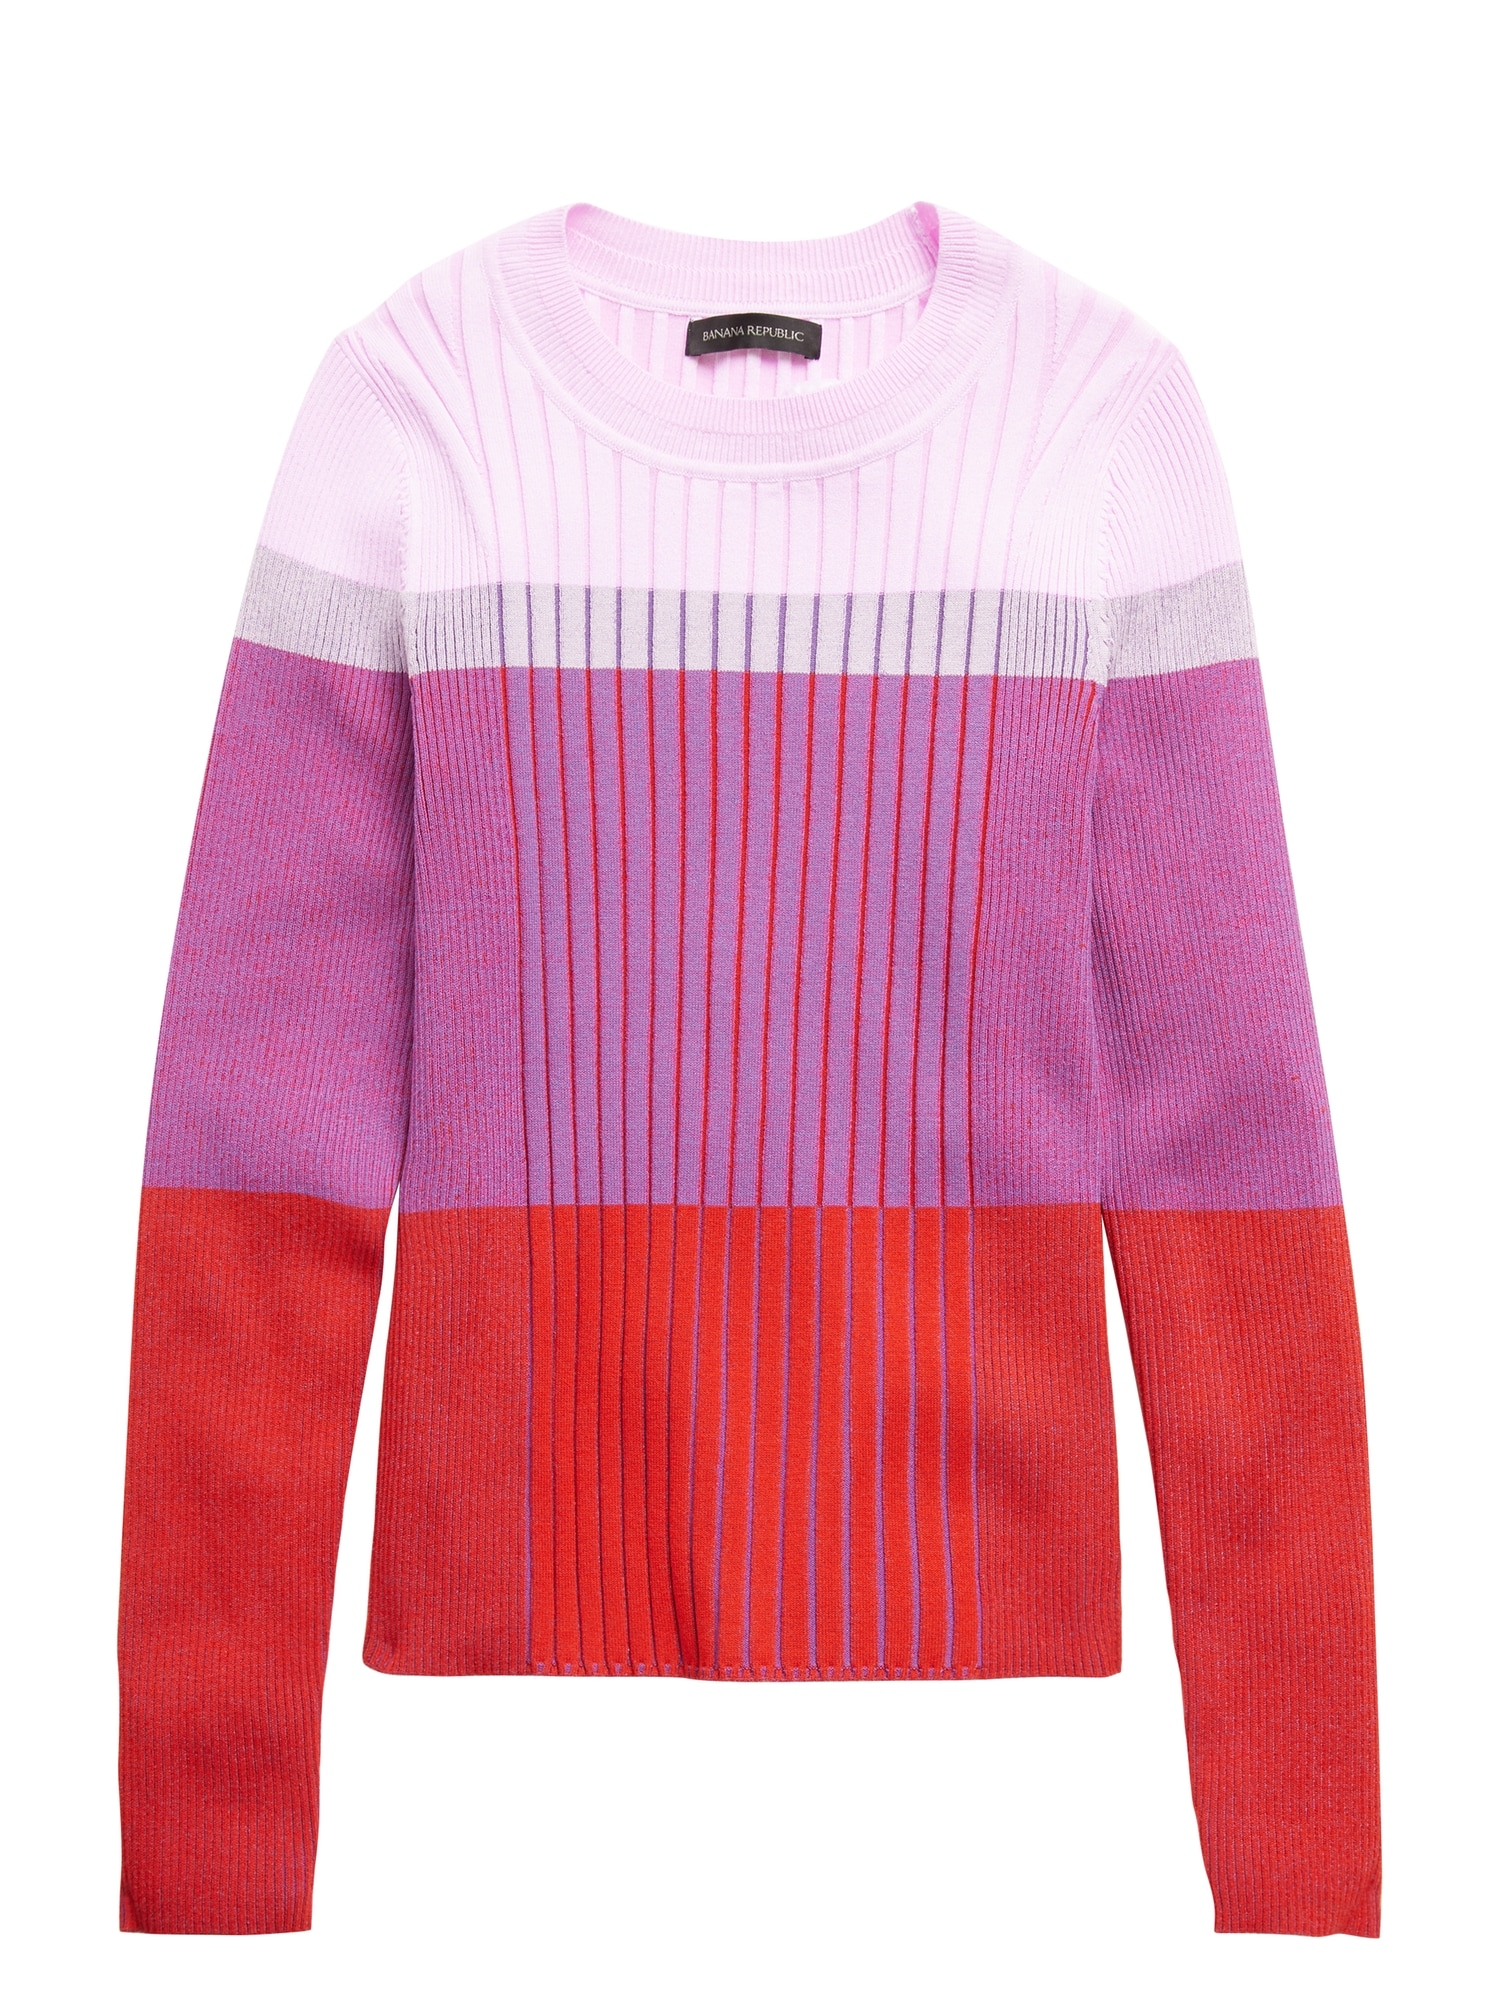 Color-Blocked Sweater Top